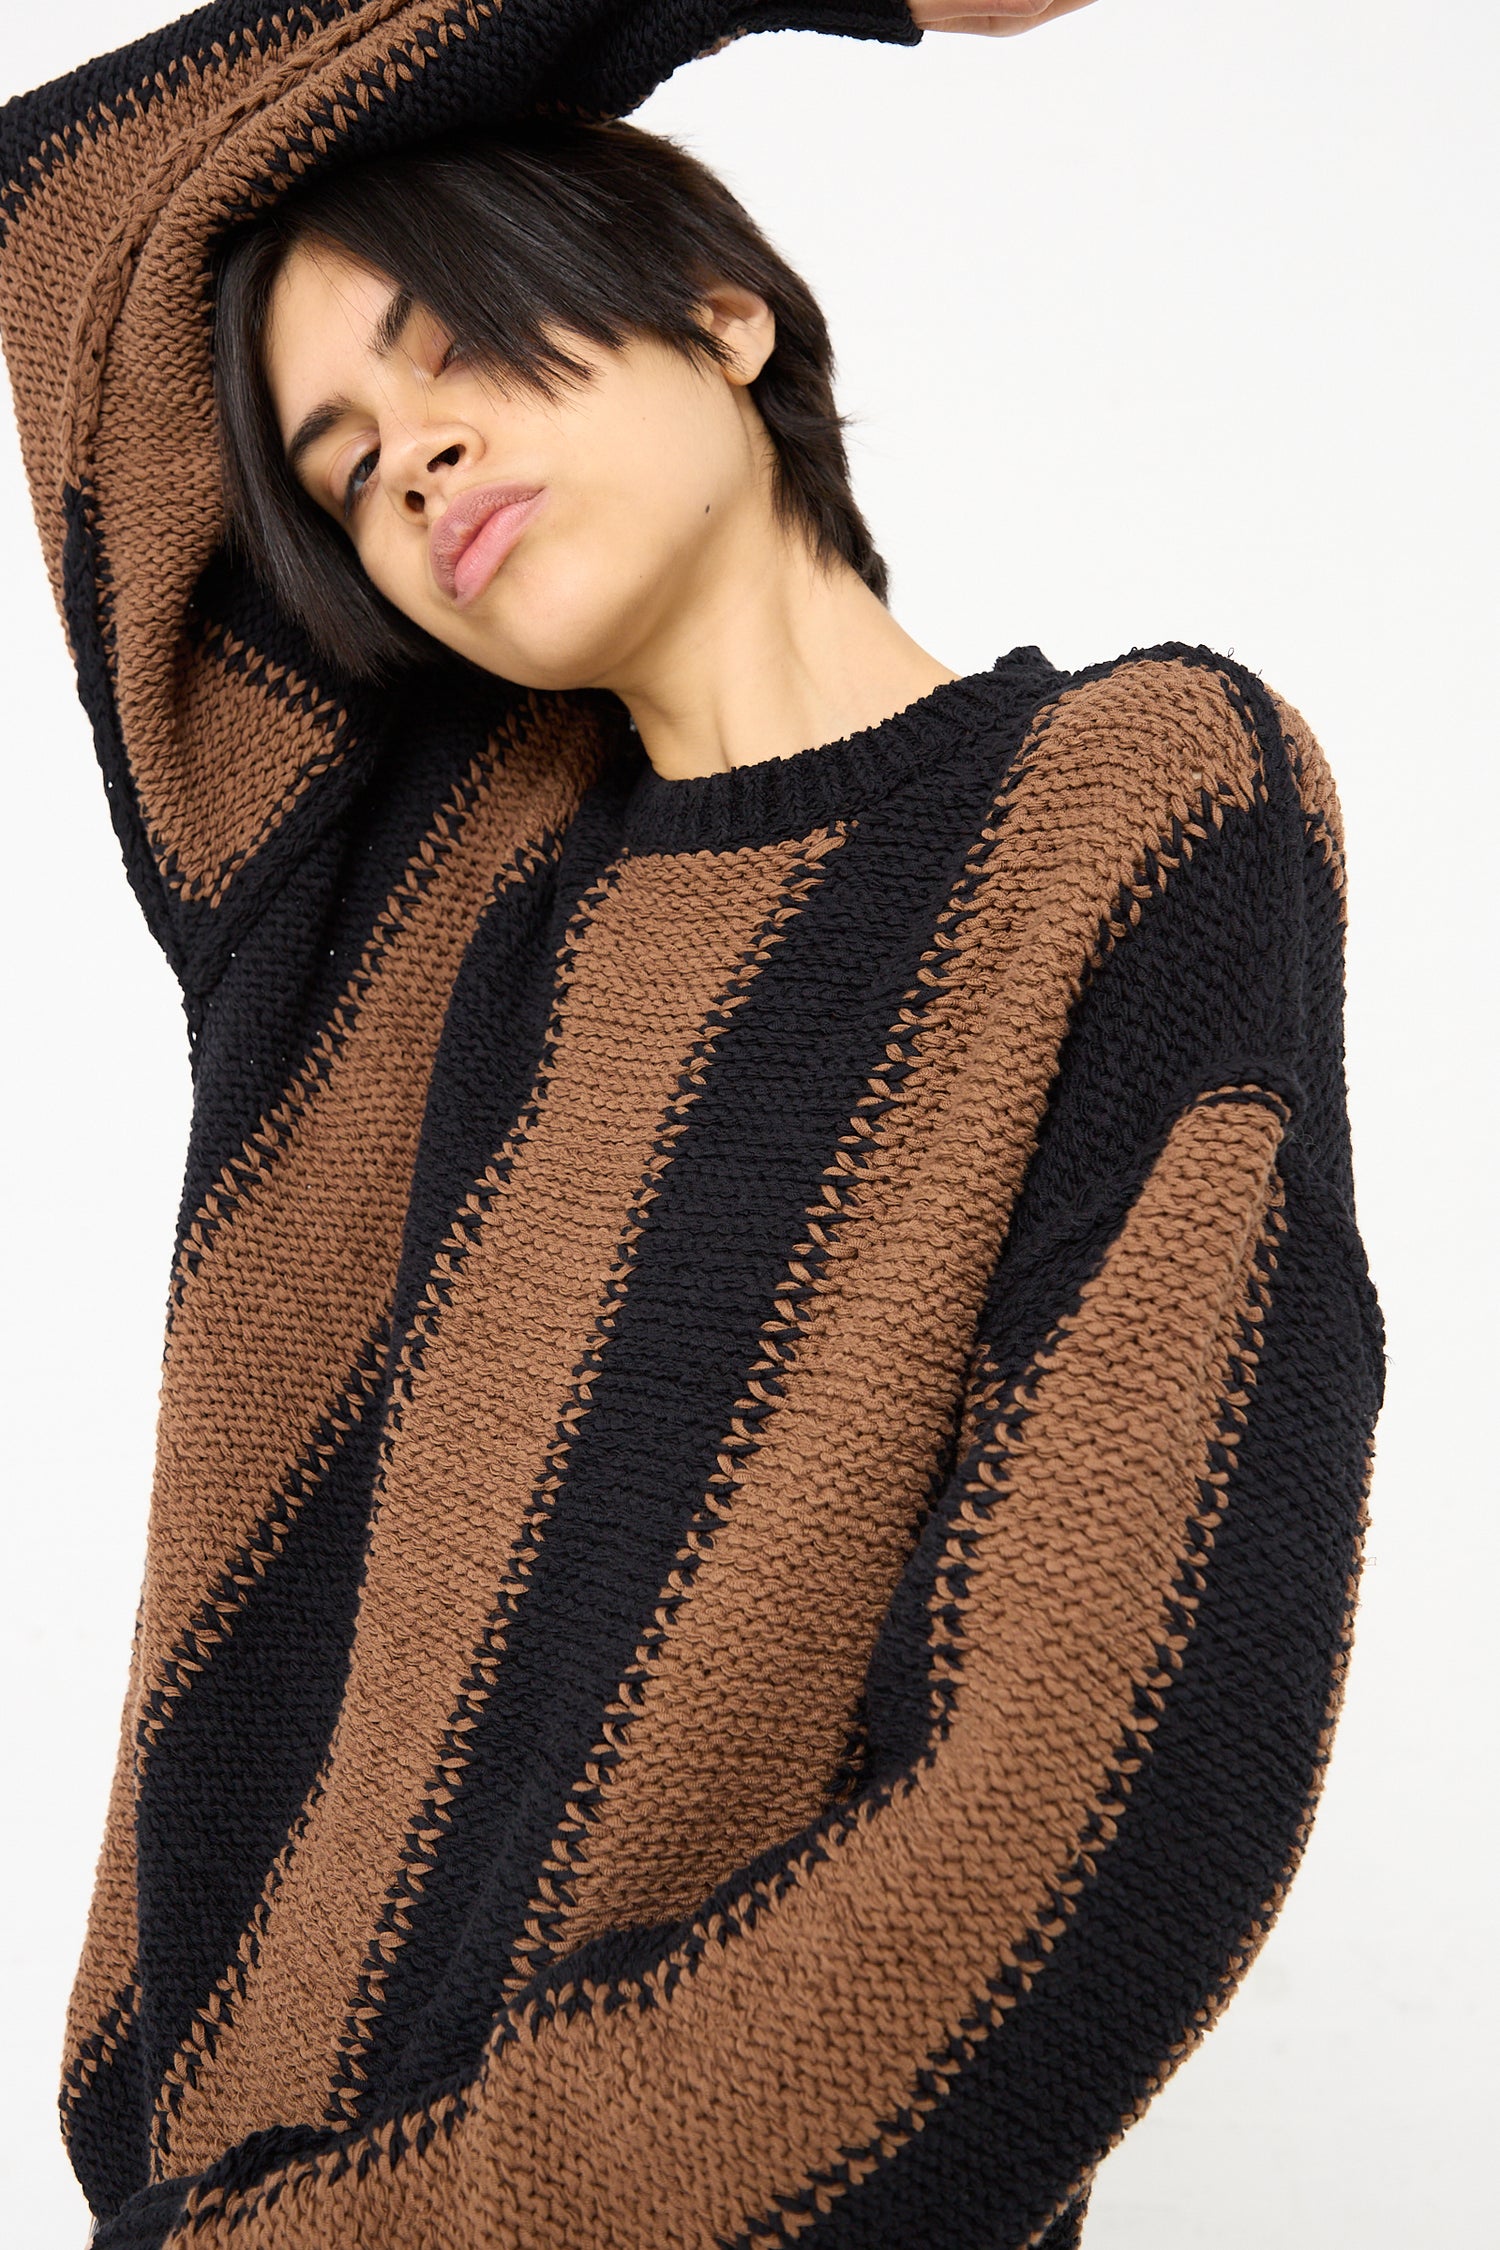 A model wearing a Cristaseya Fettuccia Striped Sweater in Black and Noisette (Brown). Front view.